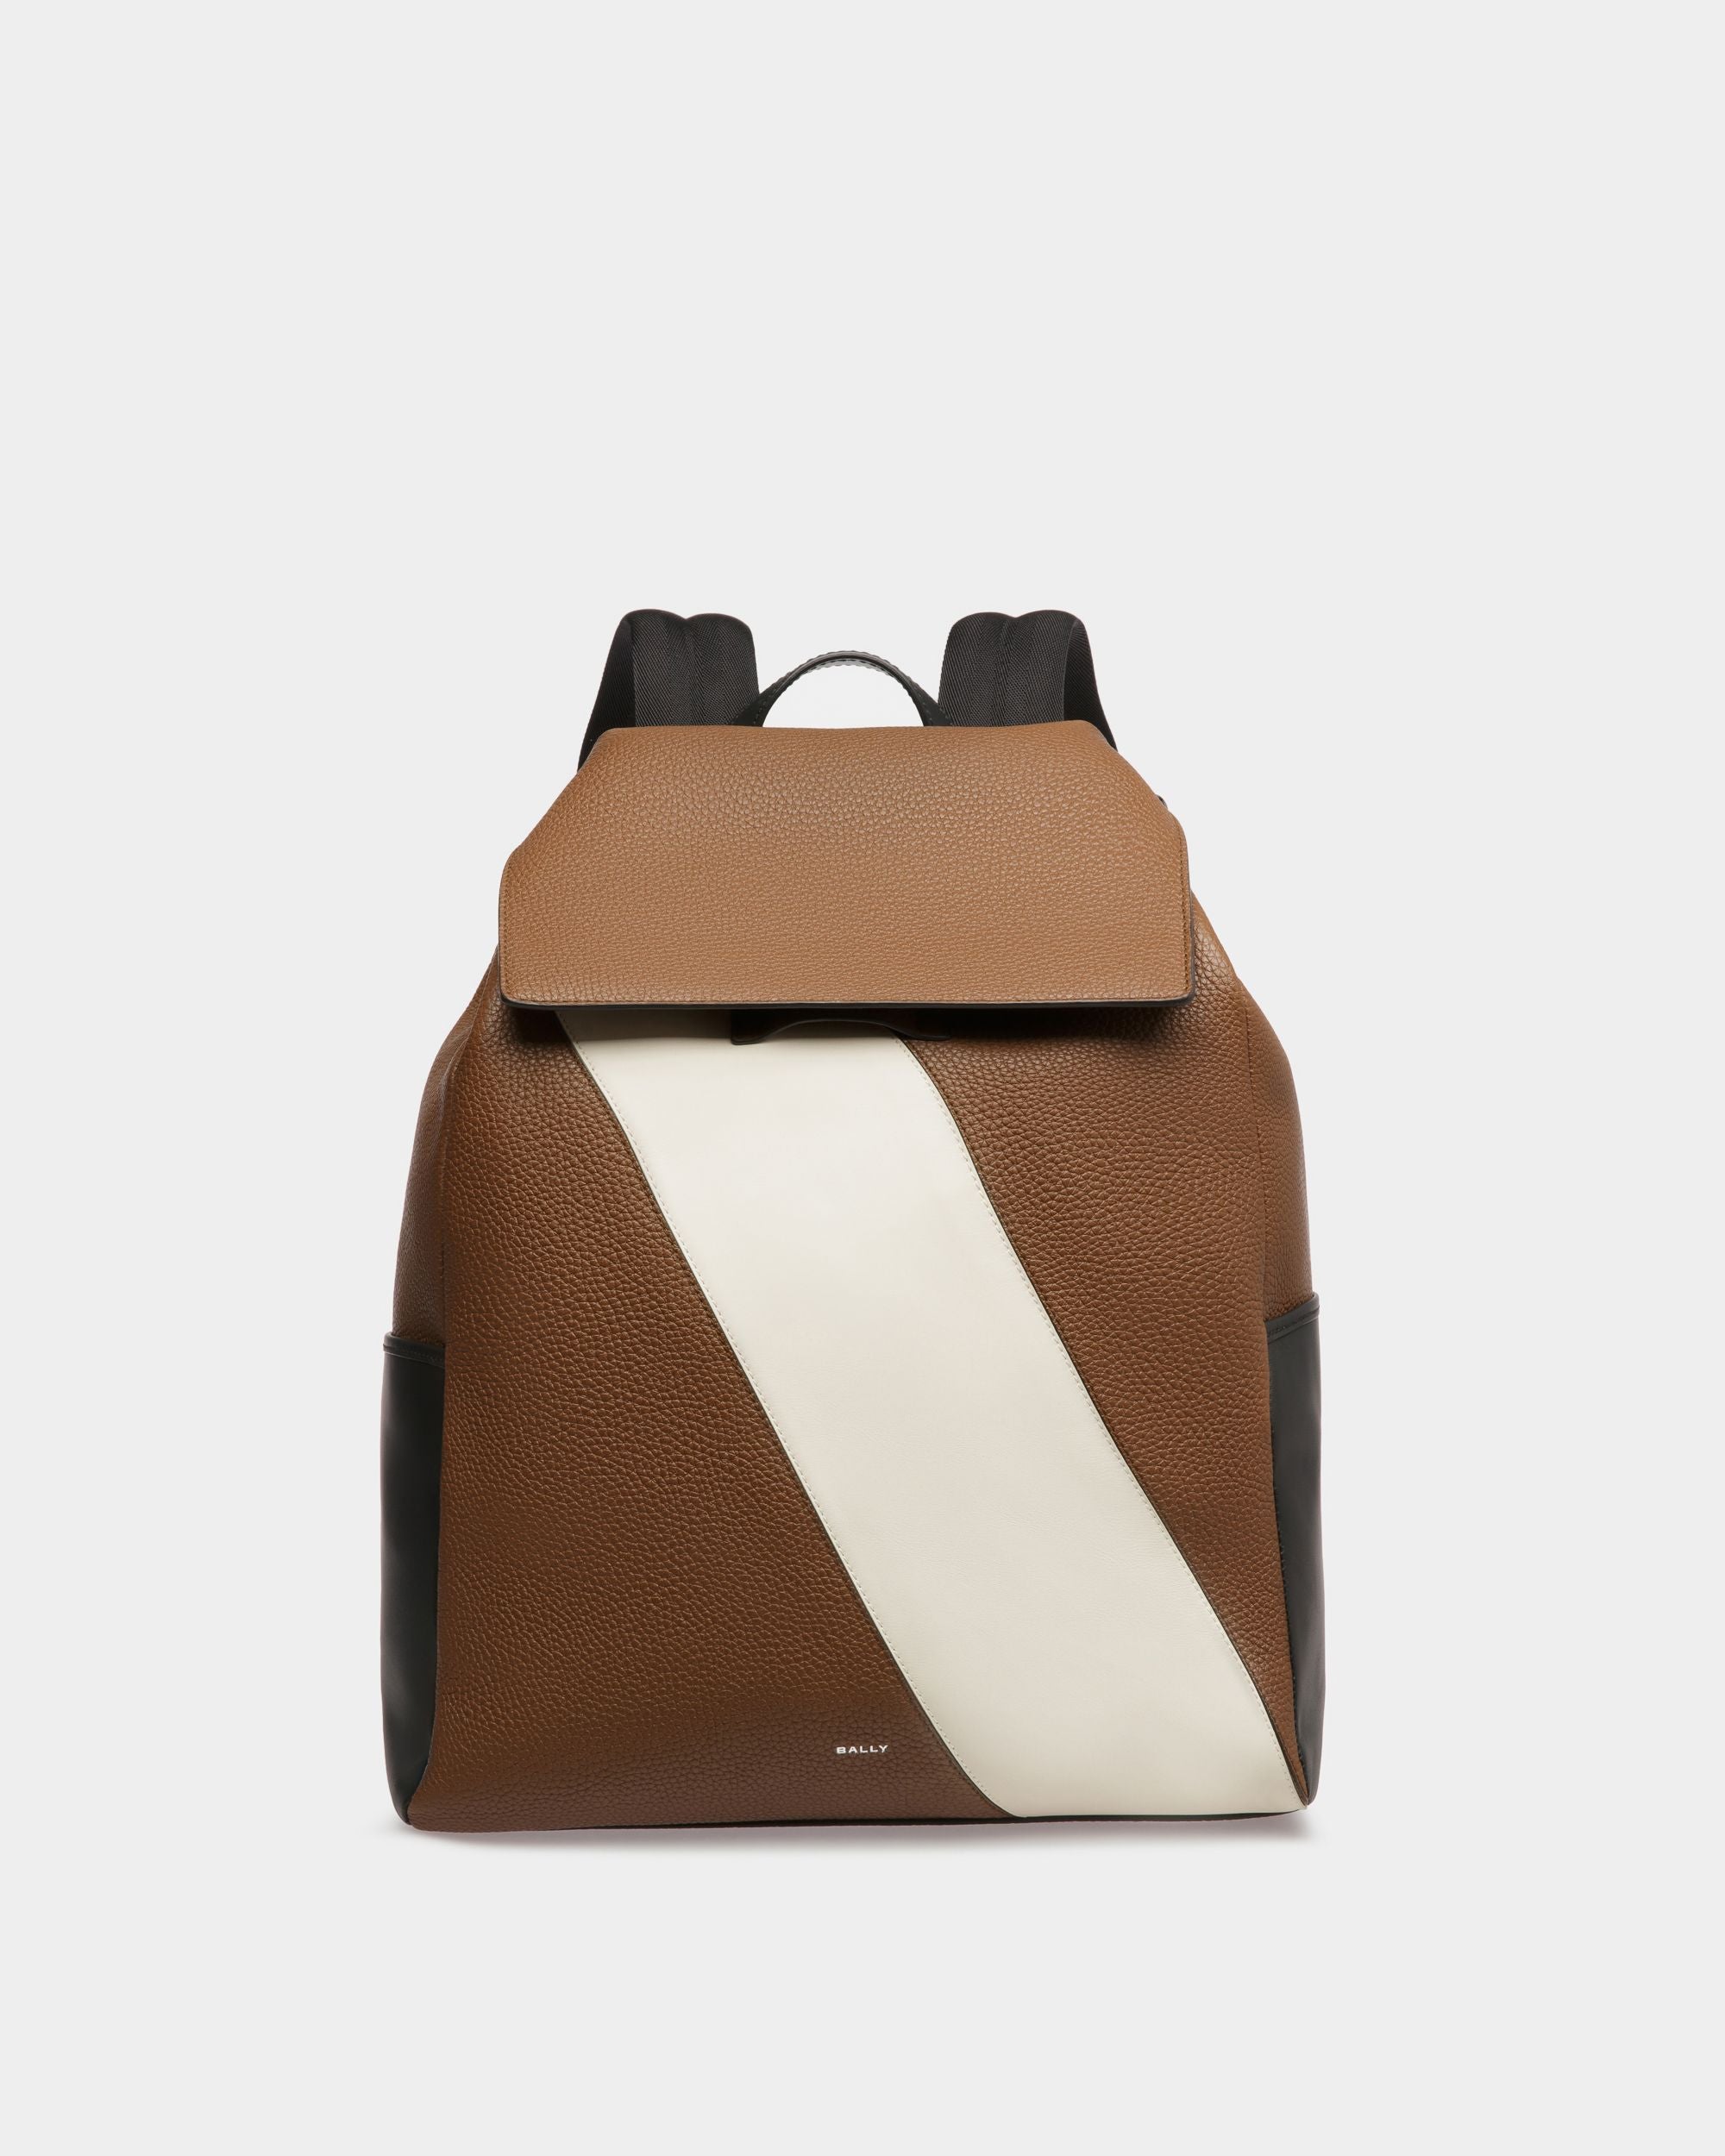 Slim | Men's Backpack | Brown Leather | Bally | Still Life Front